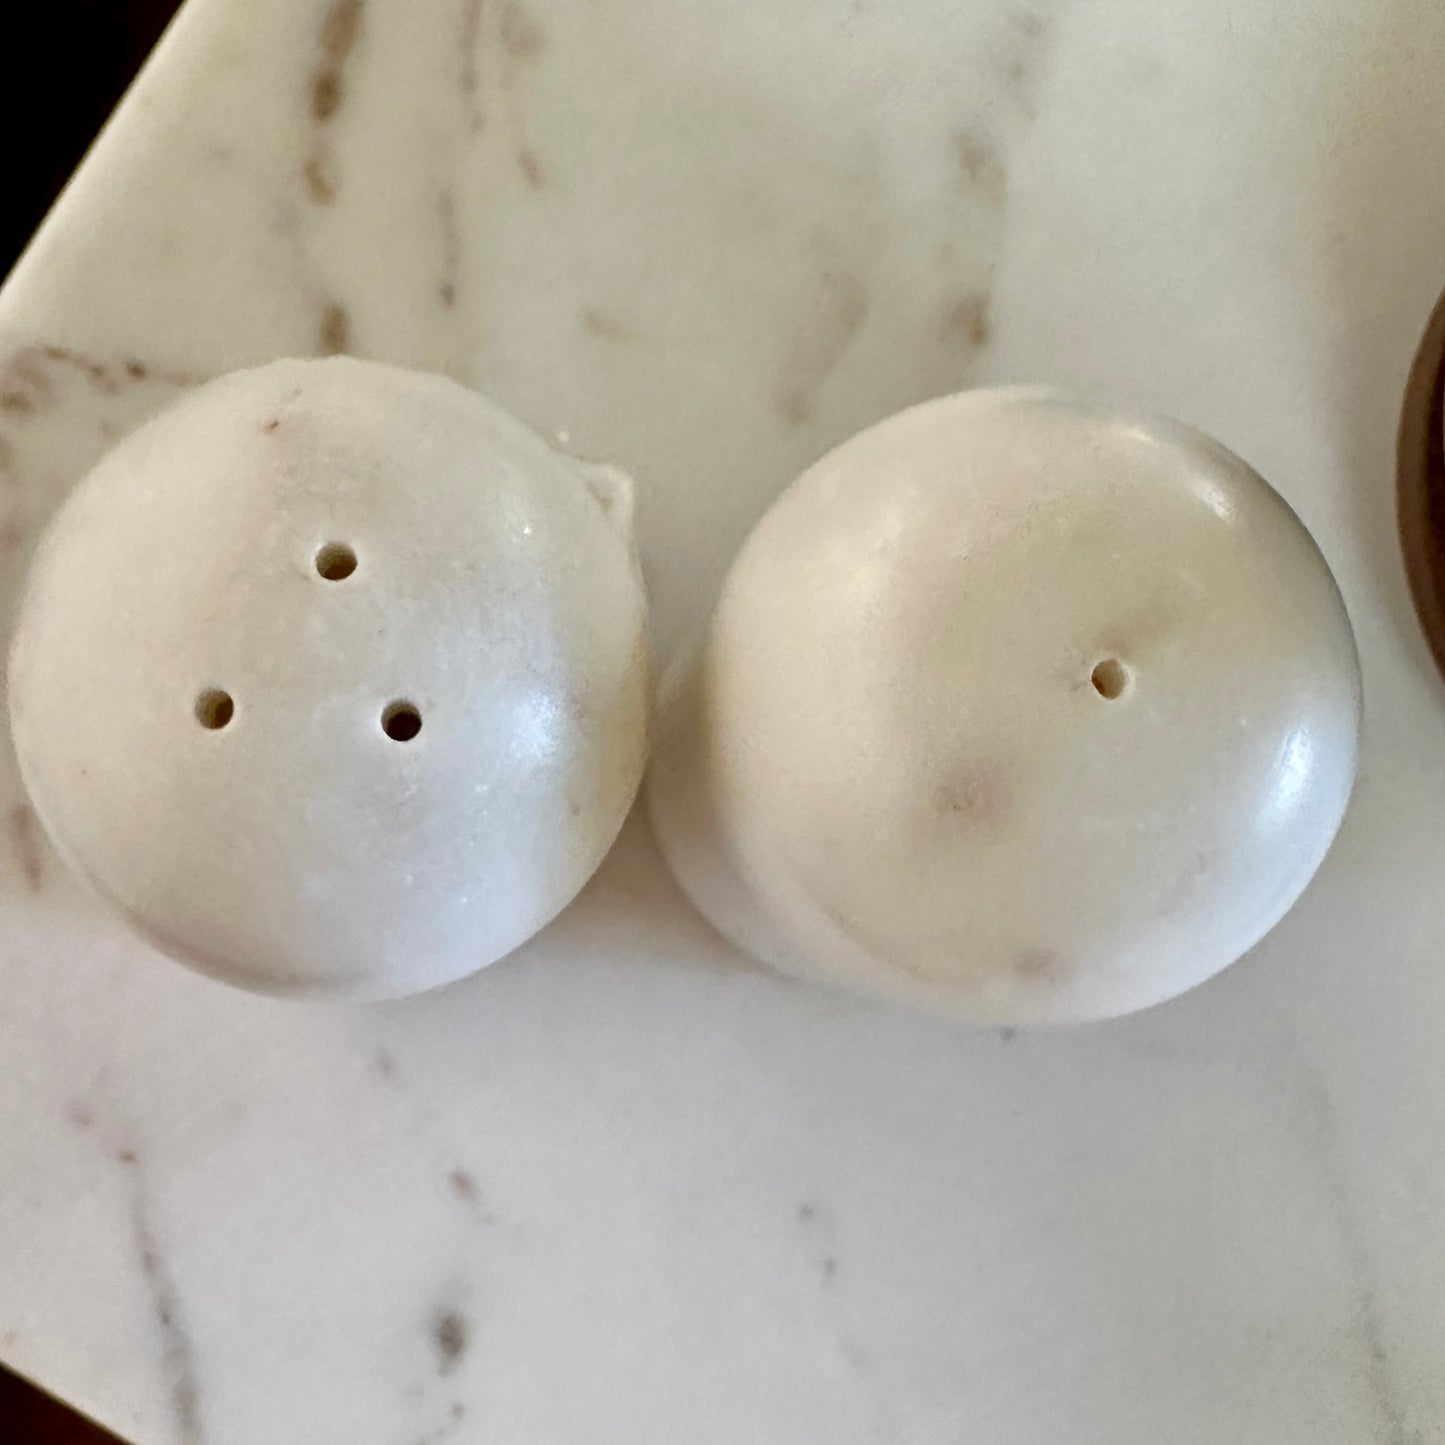 Marble Petite Set - Salt and Pepper Shakers